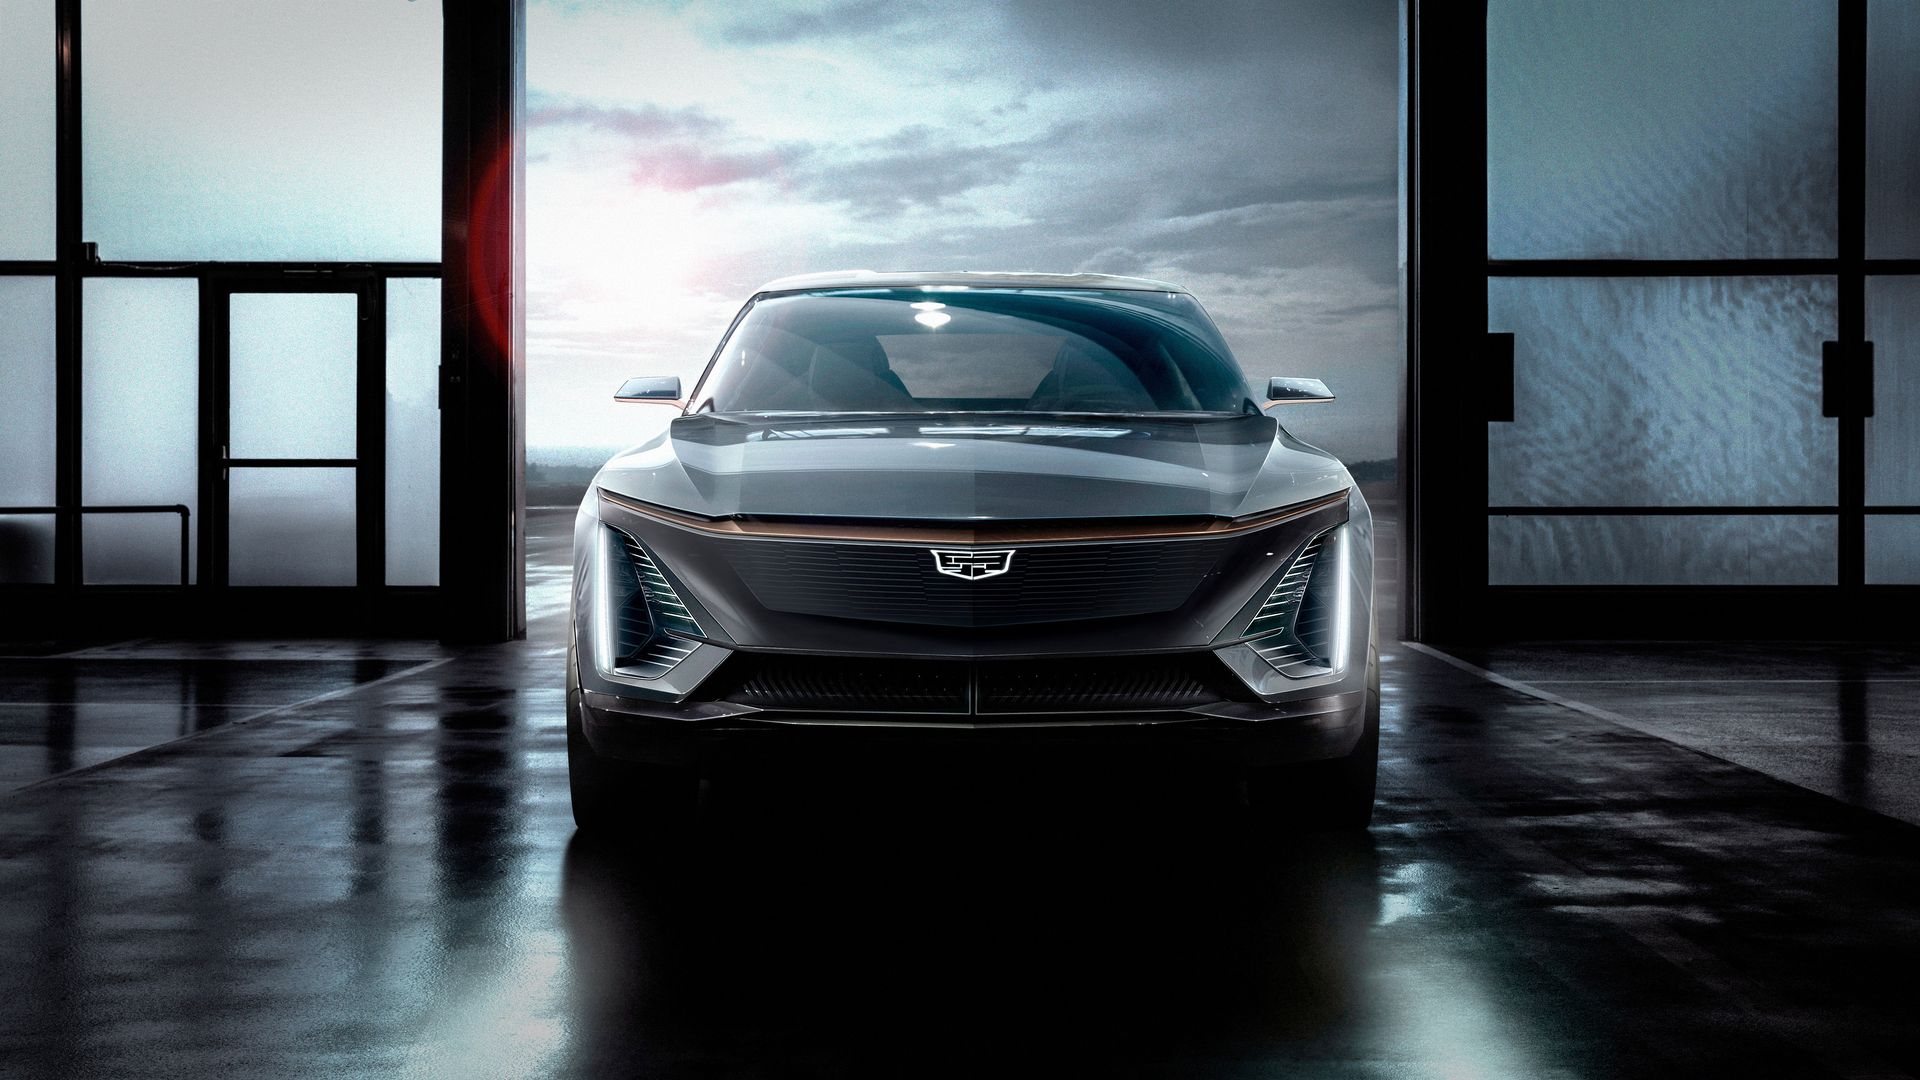 Image of upcoming Cadillac electric crossover, due in 2021